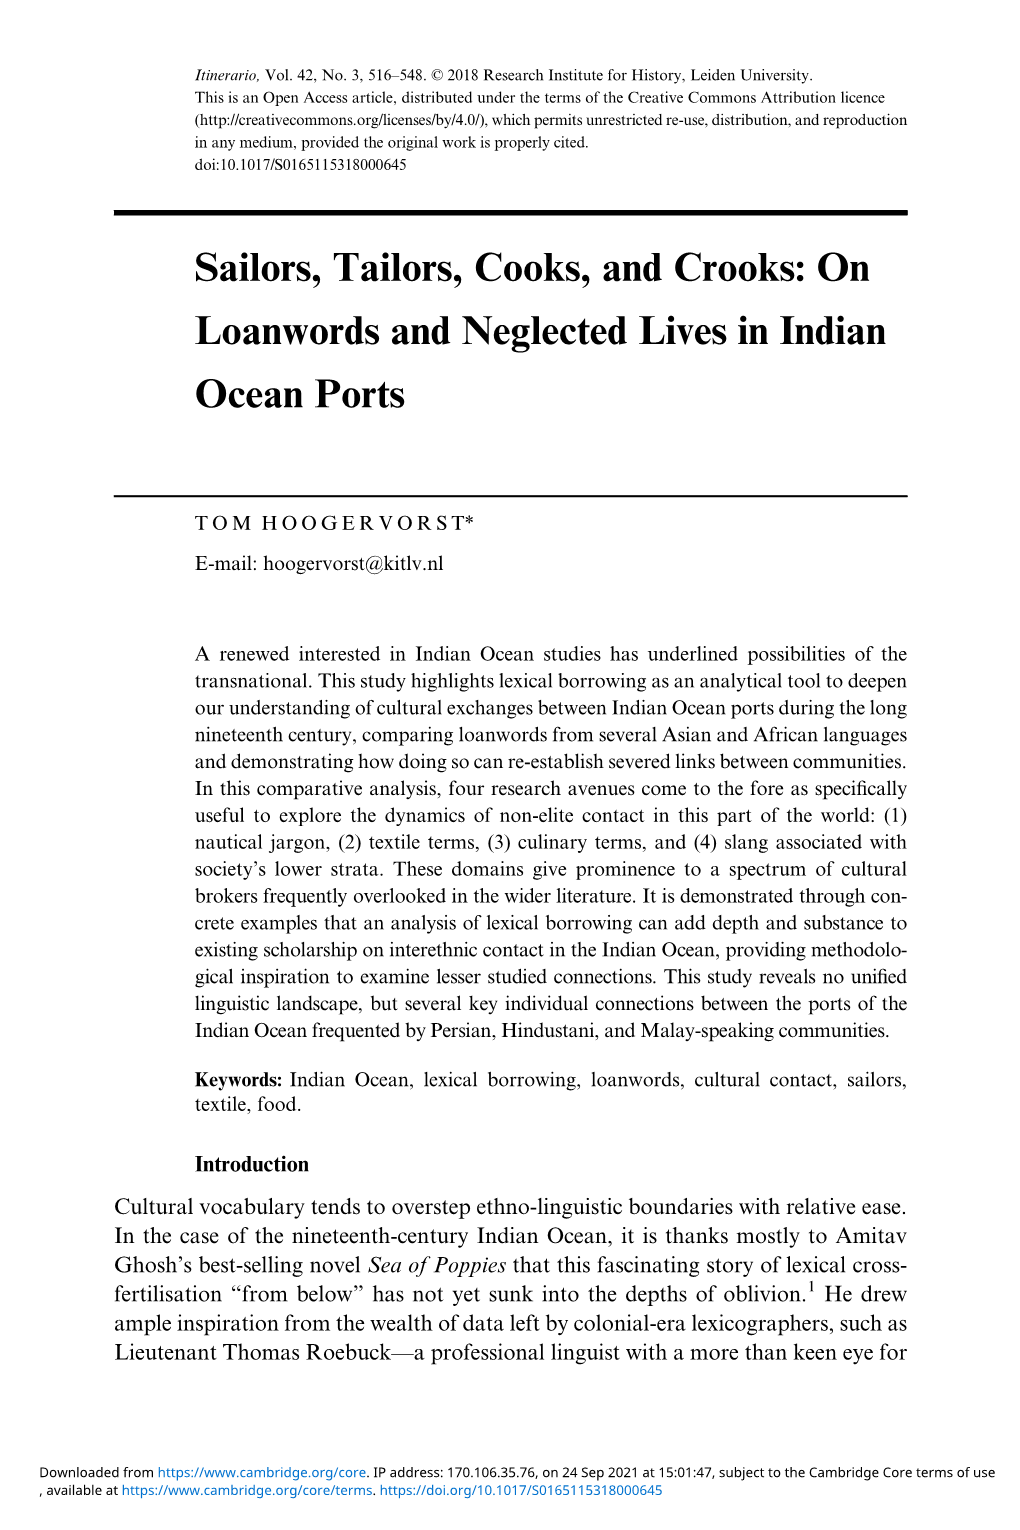 Sailors, Tailors, Cooks, and Crooks: on Loanwords and Neglected Lives in Indian Ocean Ports